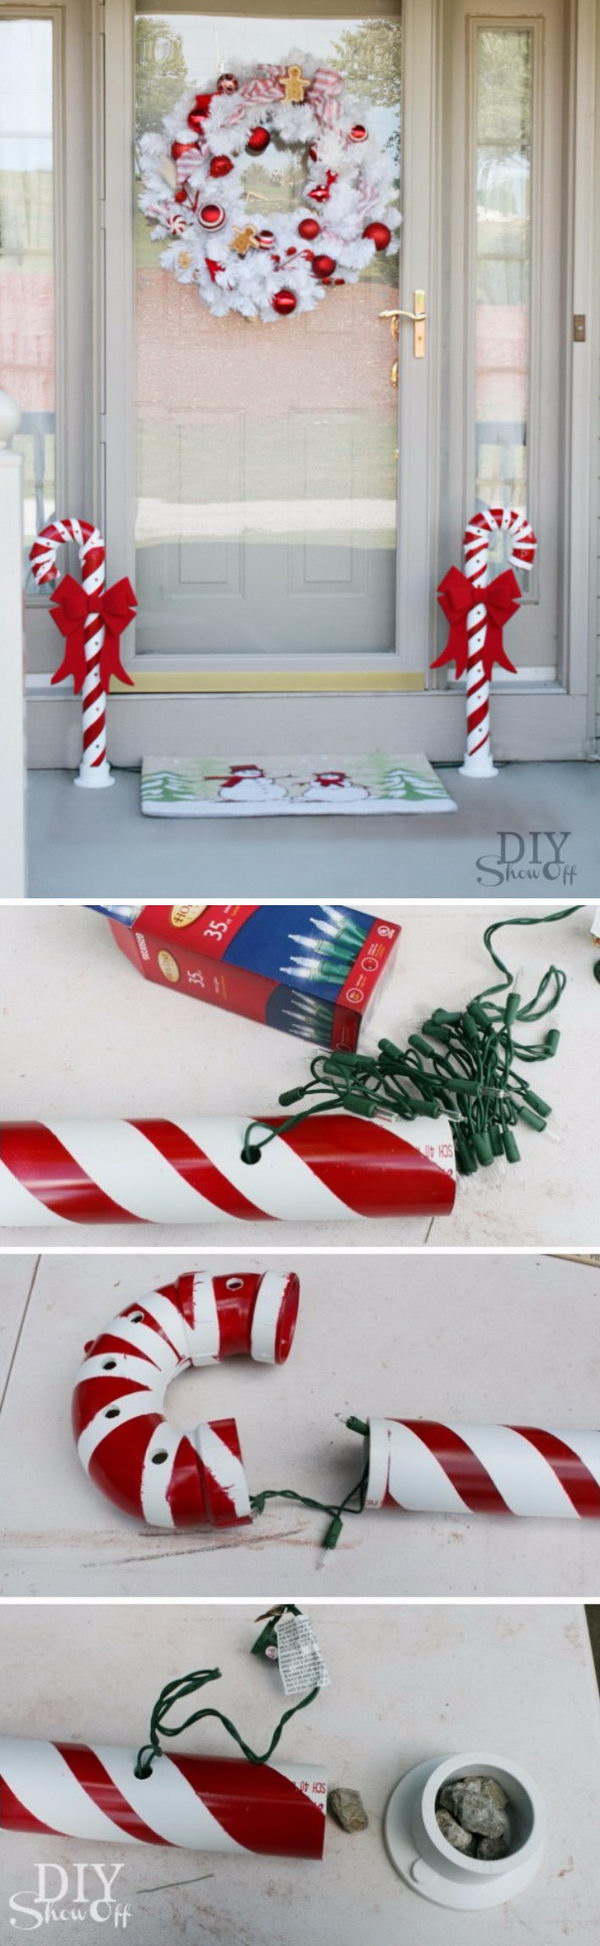 Candy Canes Made from PVC Pipes. 